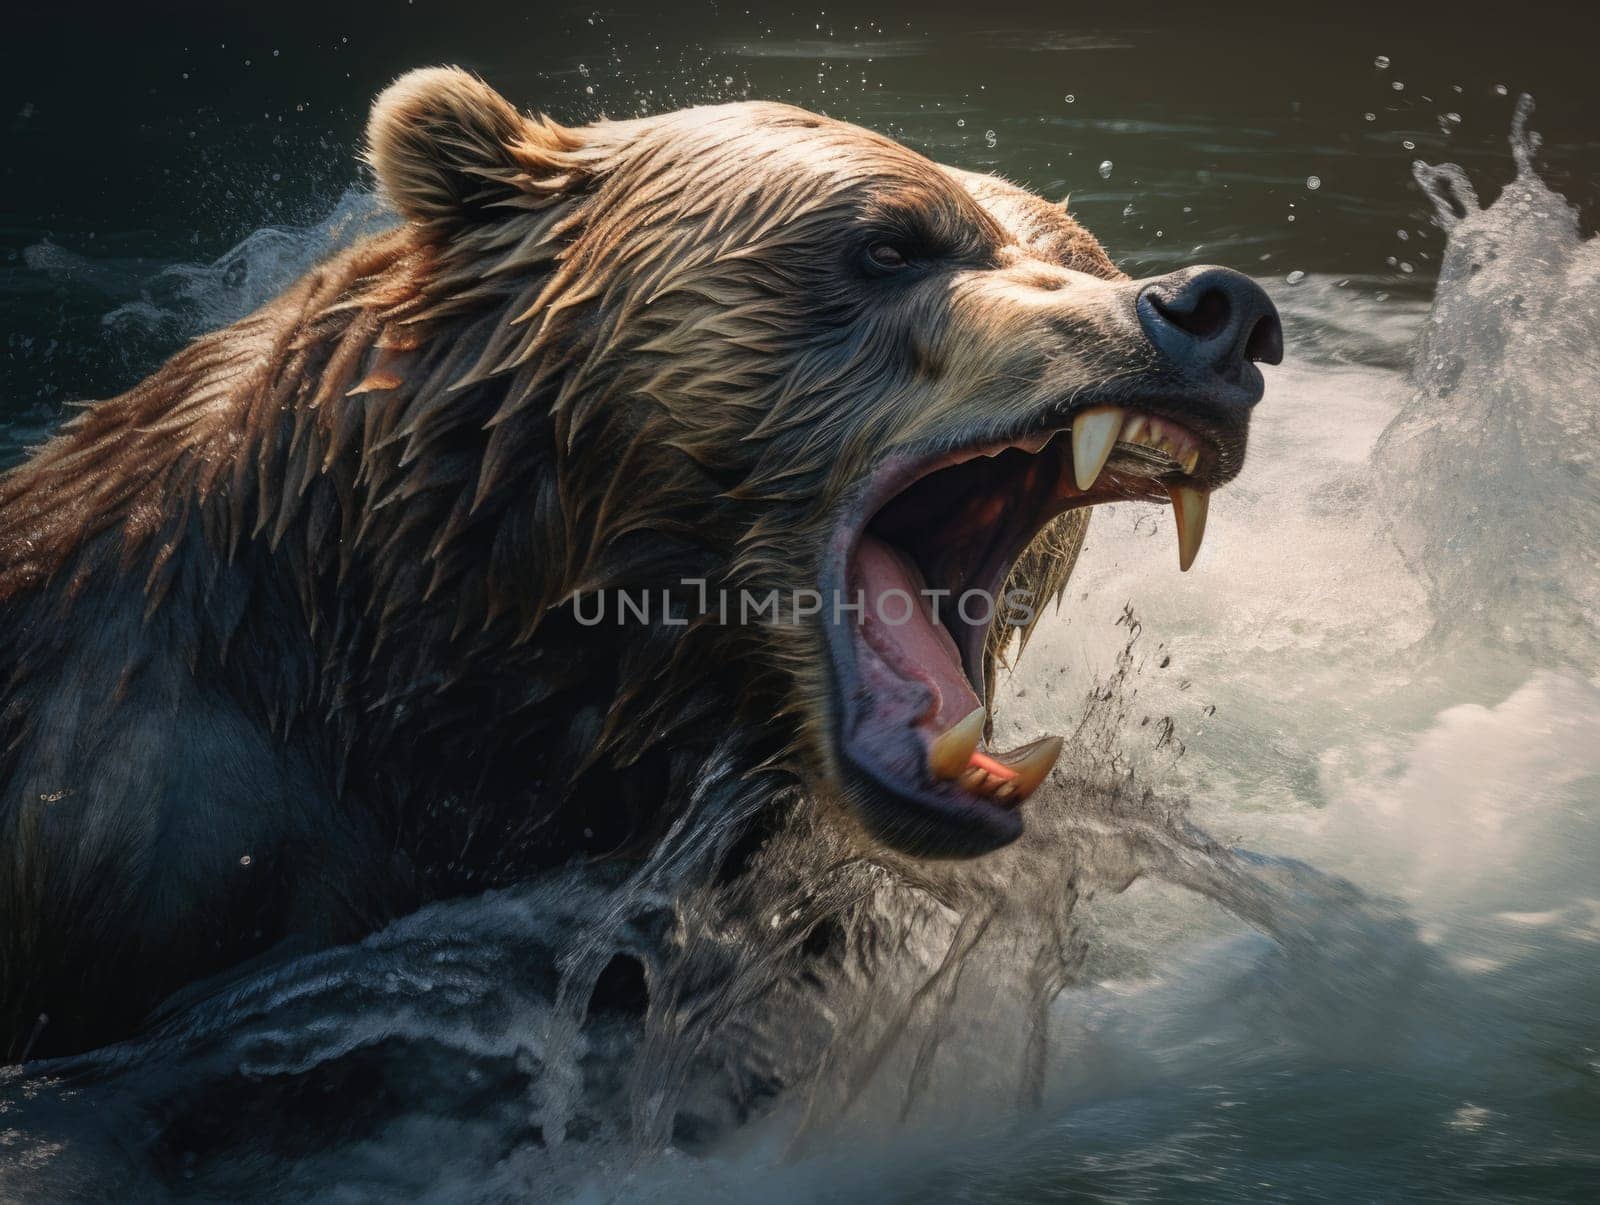 An image of a bear in the water with its mouth open.